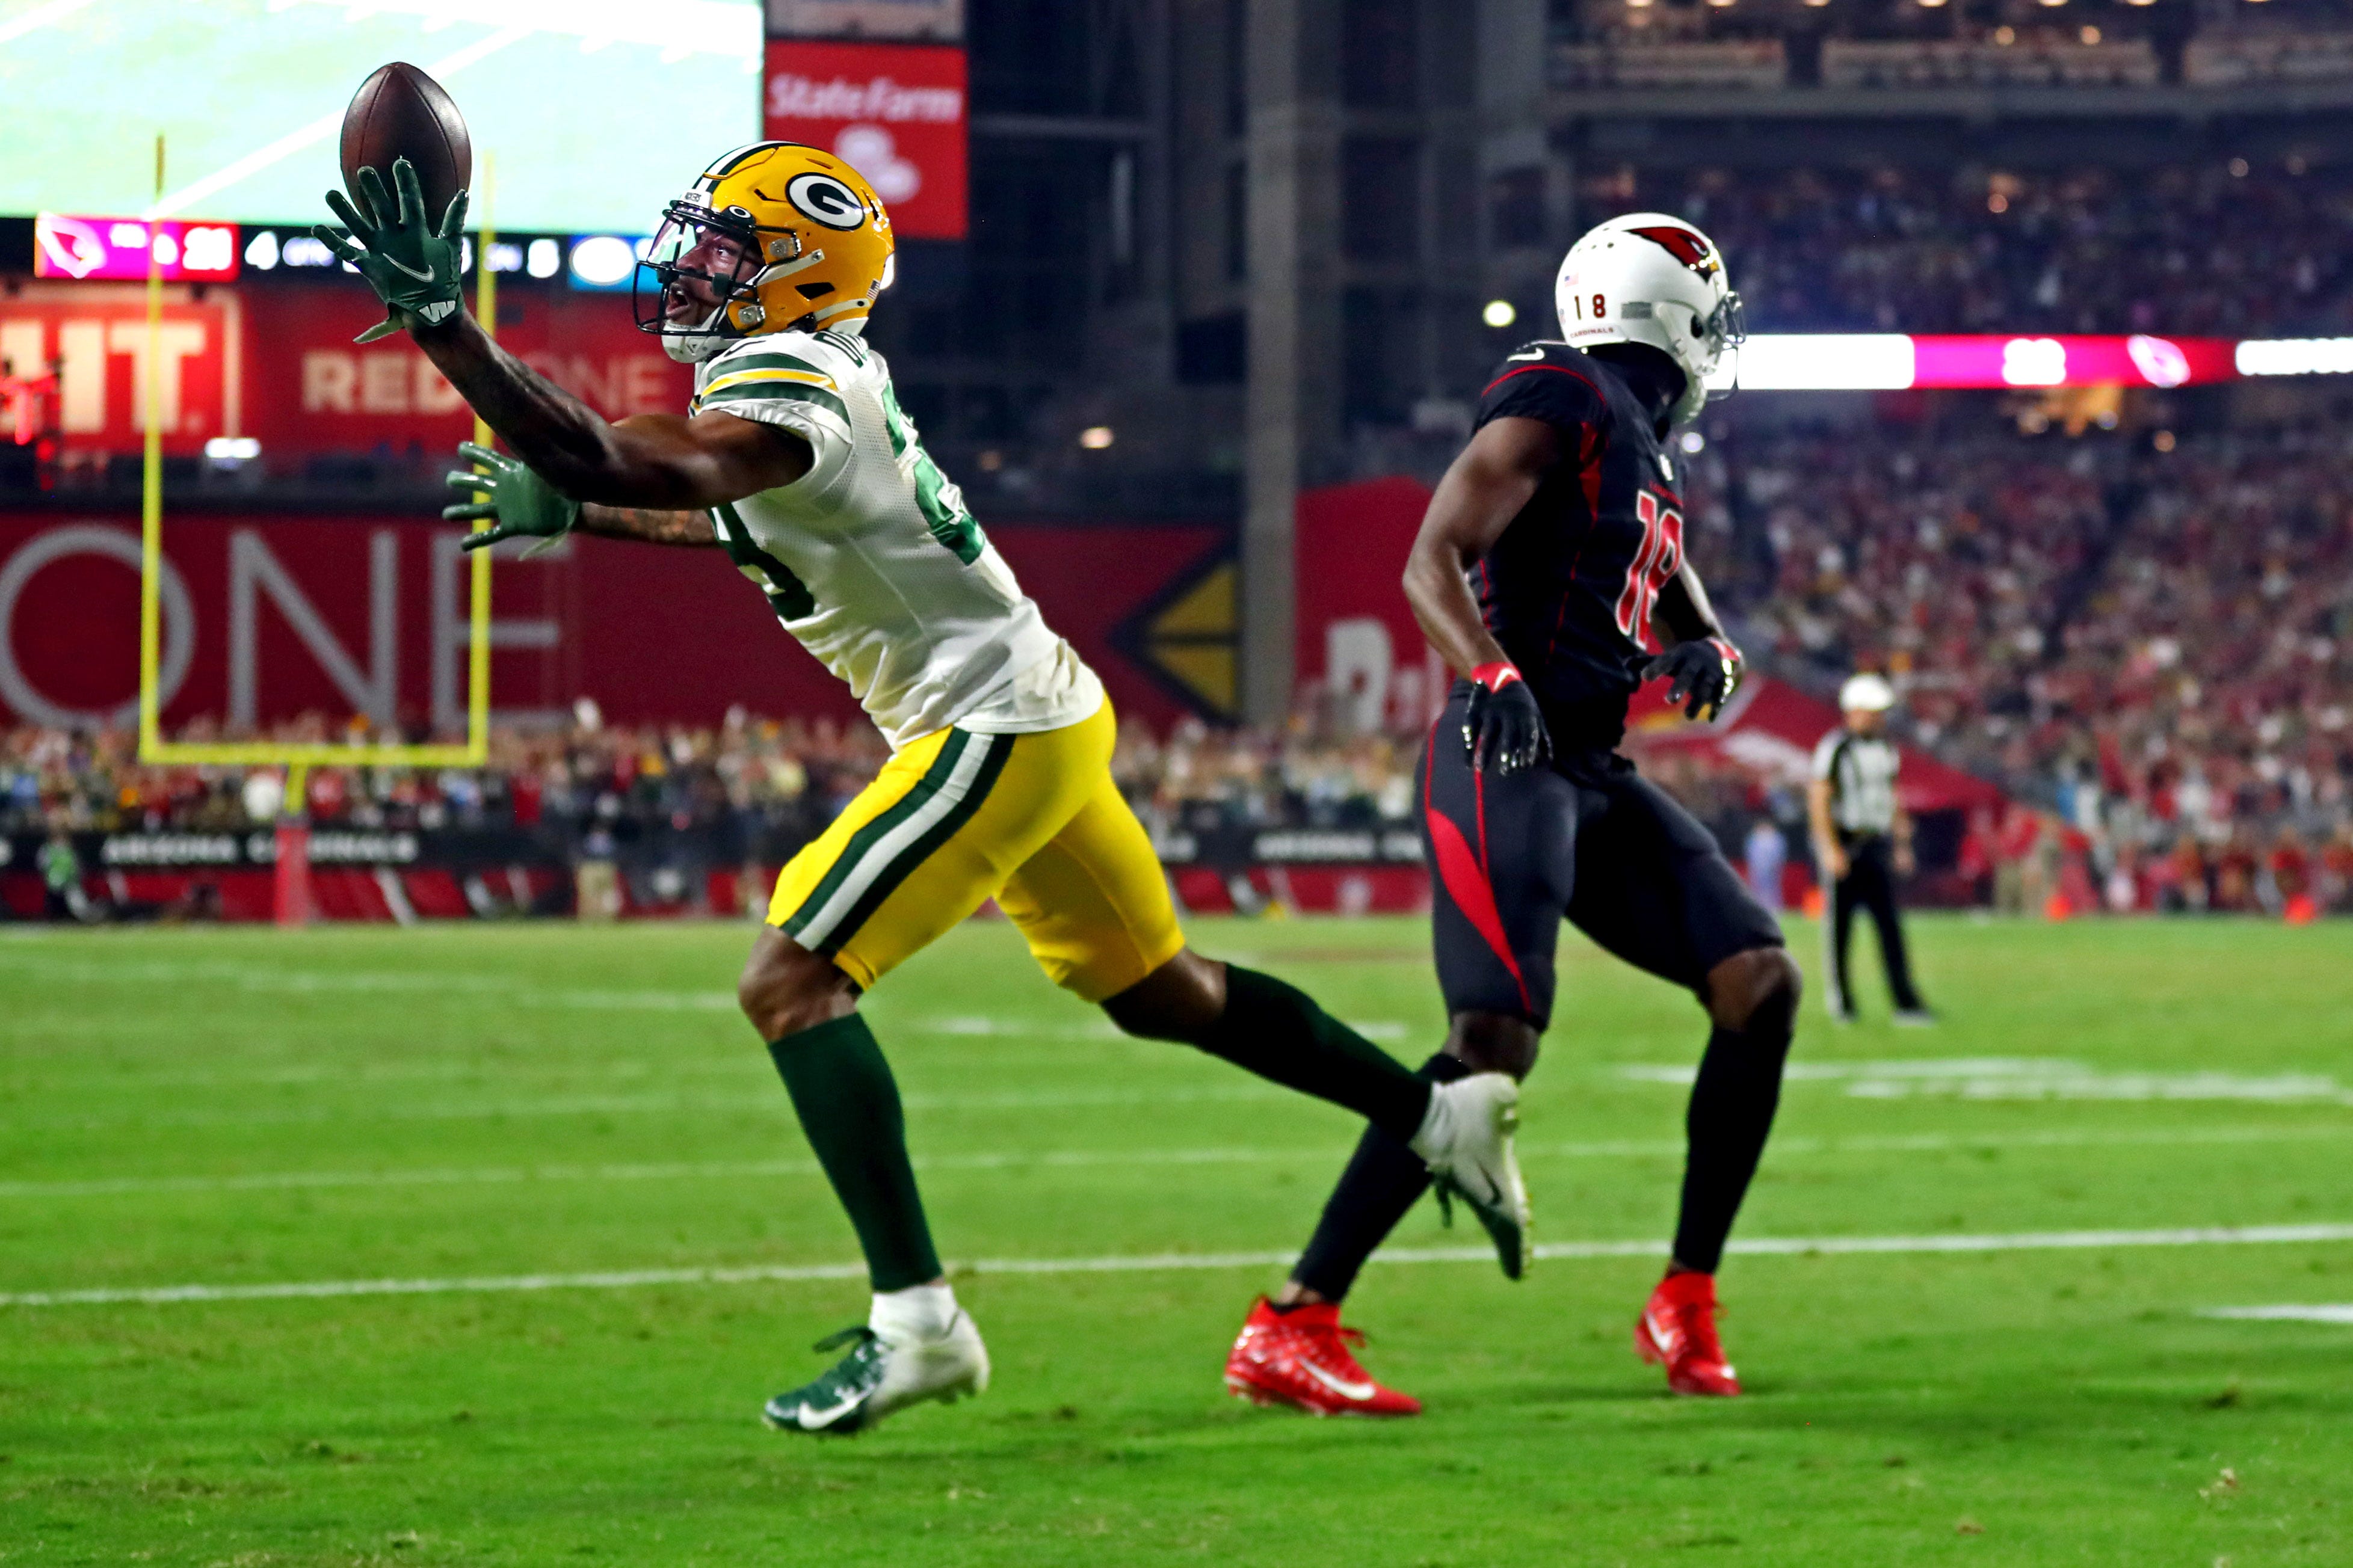 Green Bay Packers cornerback Rasul Douglas (29) makes a game-winning interception on a pass intended for Arizona Cardinals wide receiver Greg Dortch (16) during the fourth quarter on Thursday, Oct. 28, 2021, at State Farm Stadium. The interception sealed the Packers' 24-21 win.